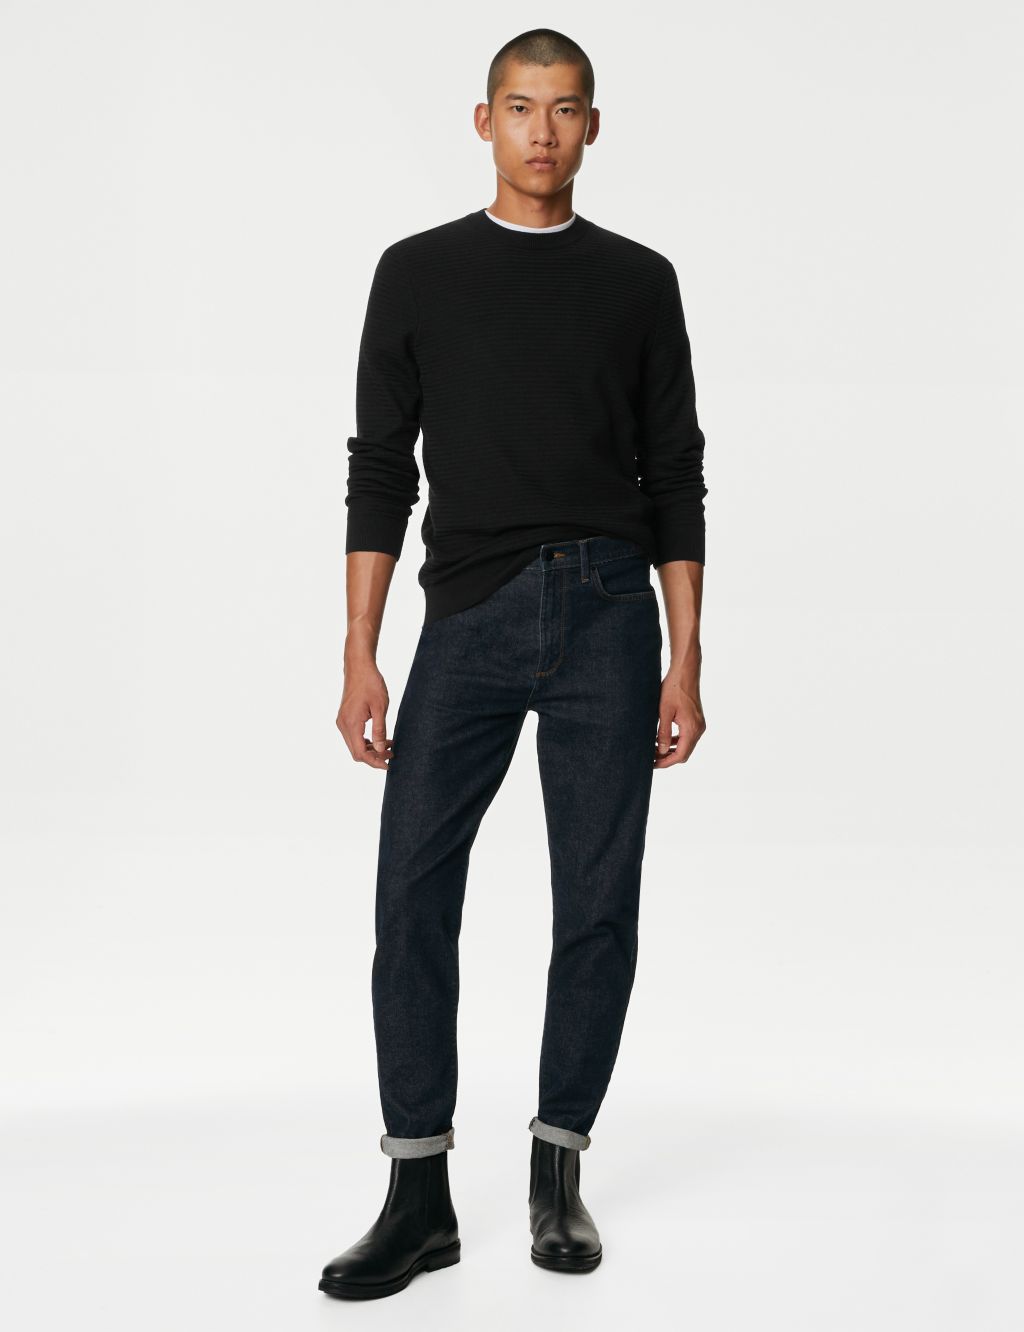 Cotton and Modal Blend Textured Crew Neck Jumper image 1